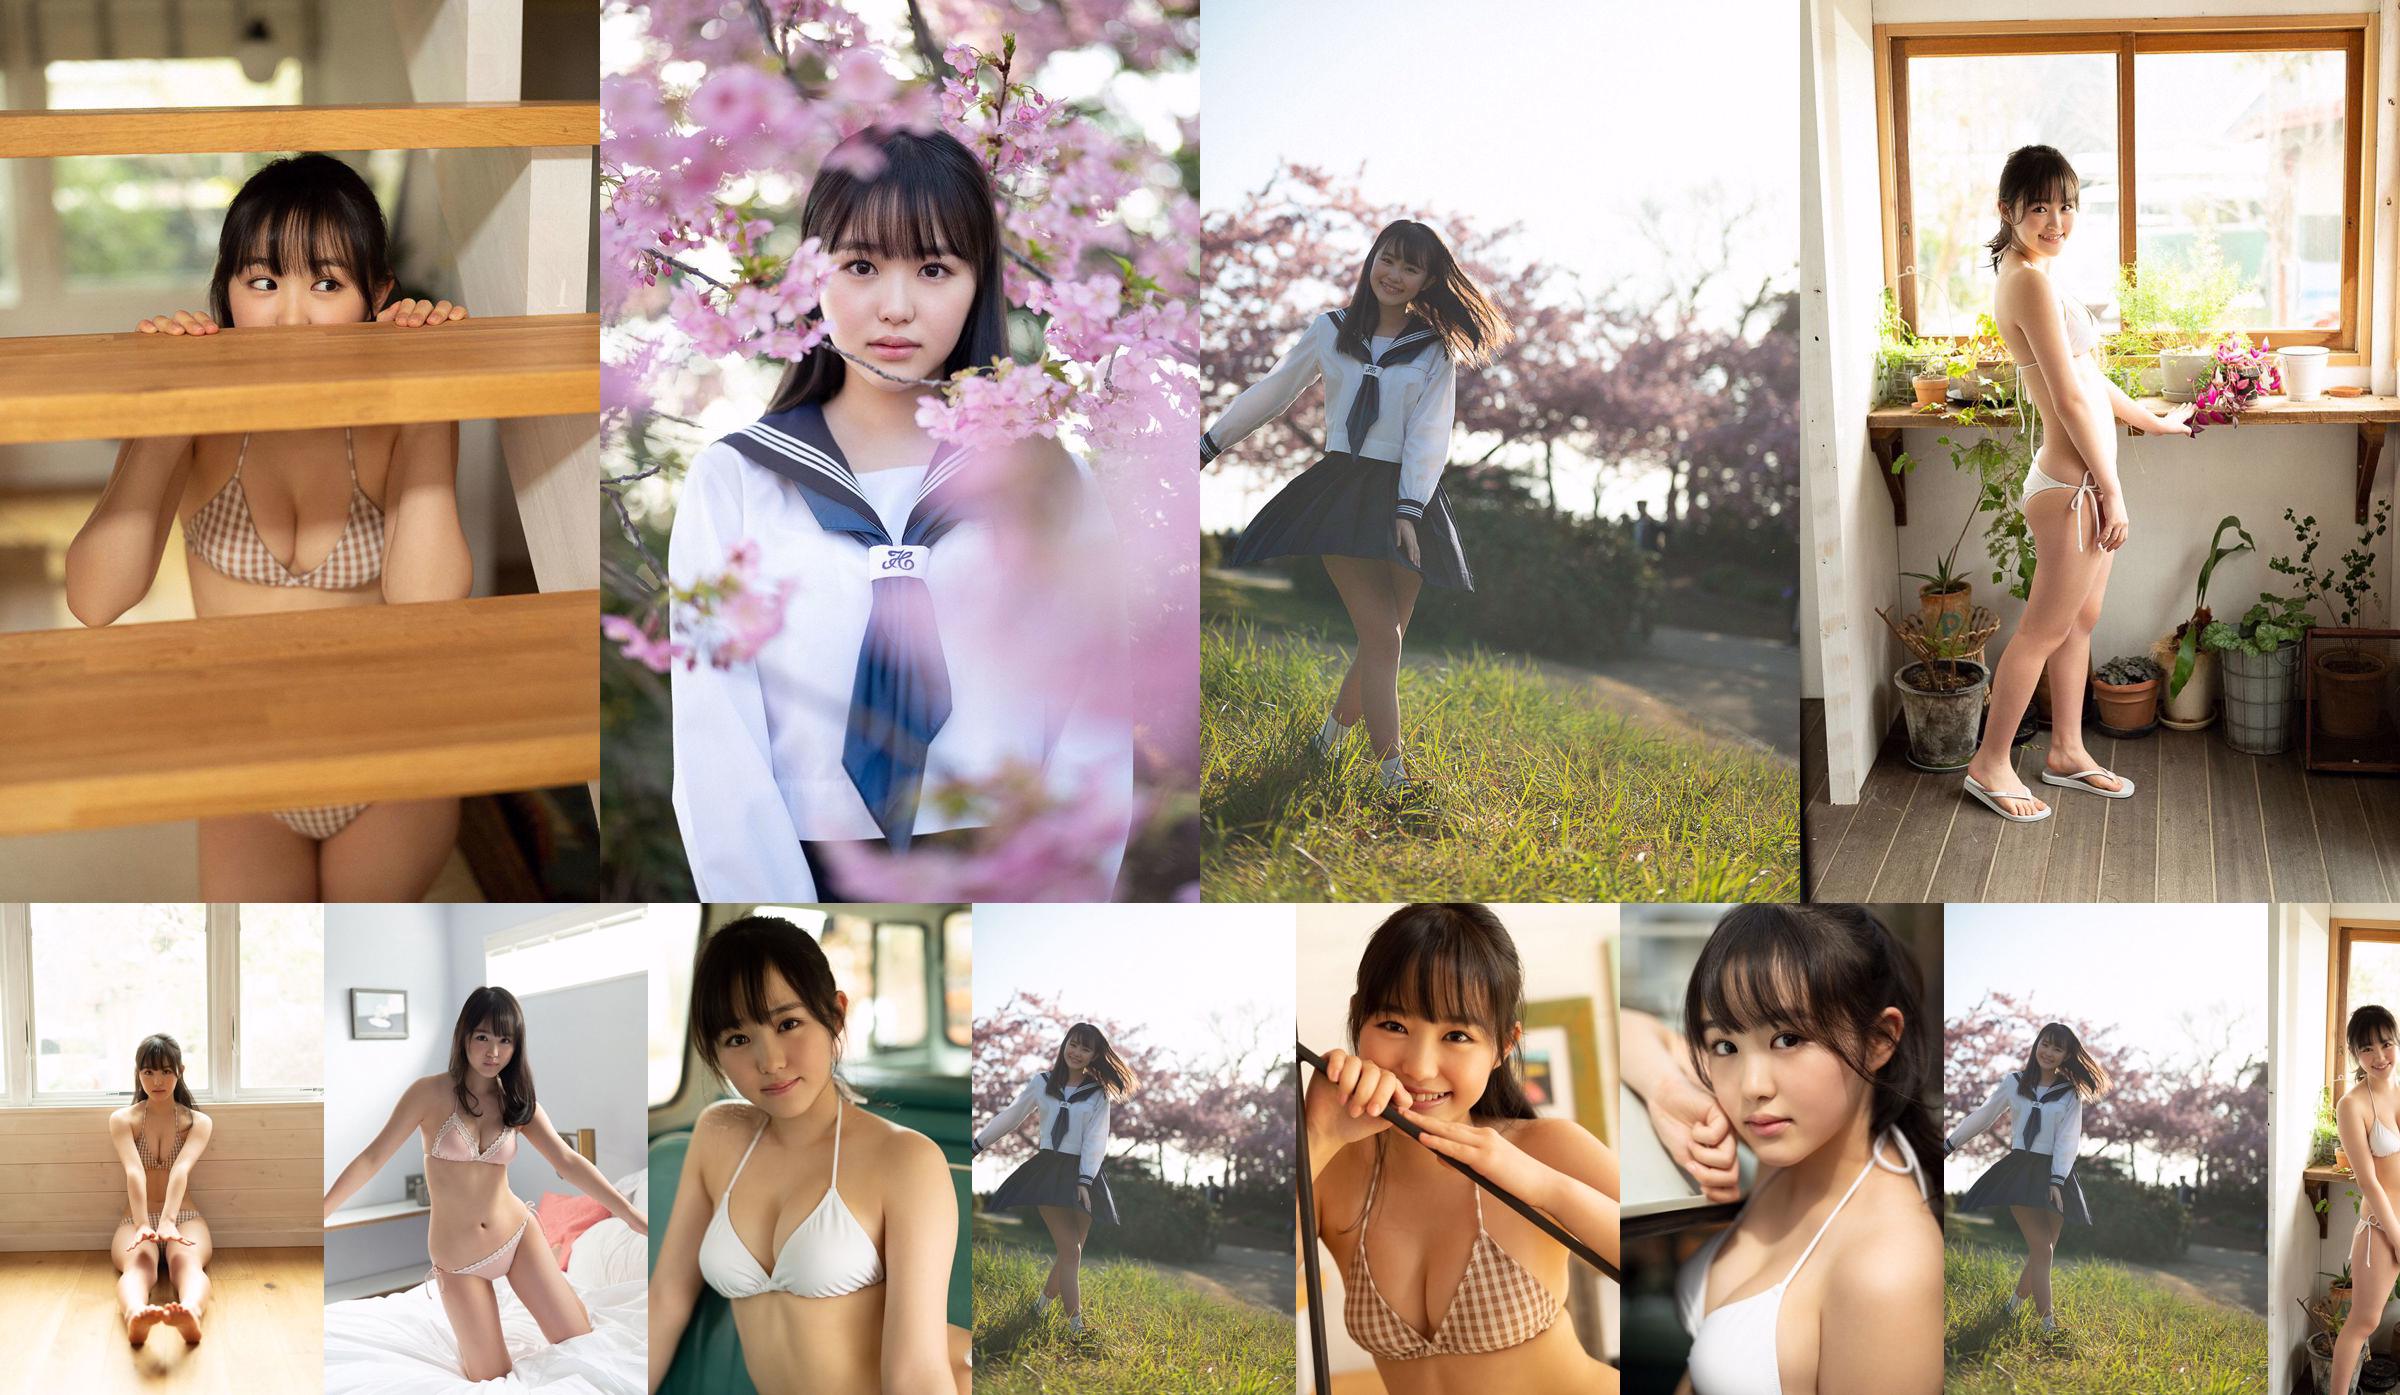 Koharu Ito "Come in Spring." [WPB-net] EXtra810 No.70aaf9 Page 3